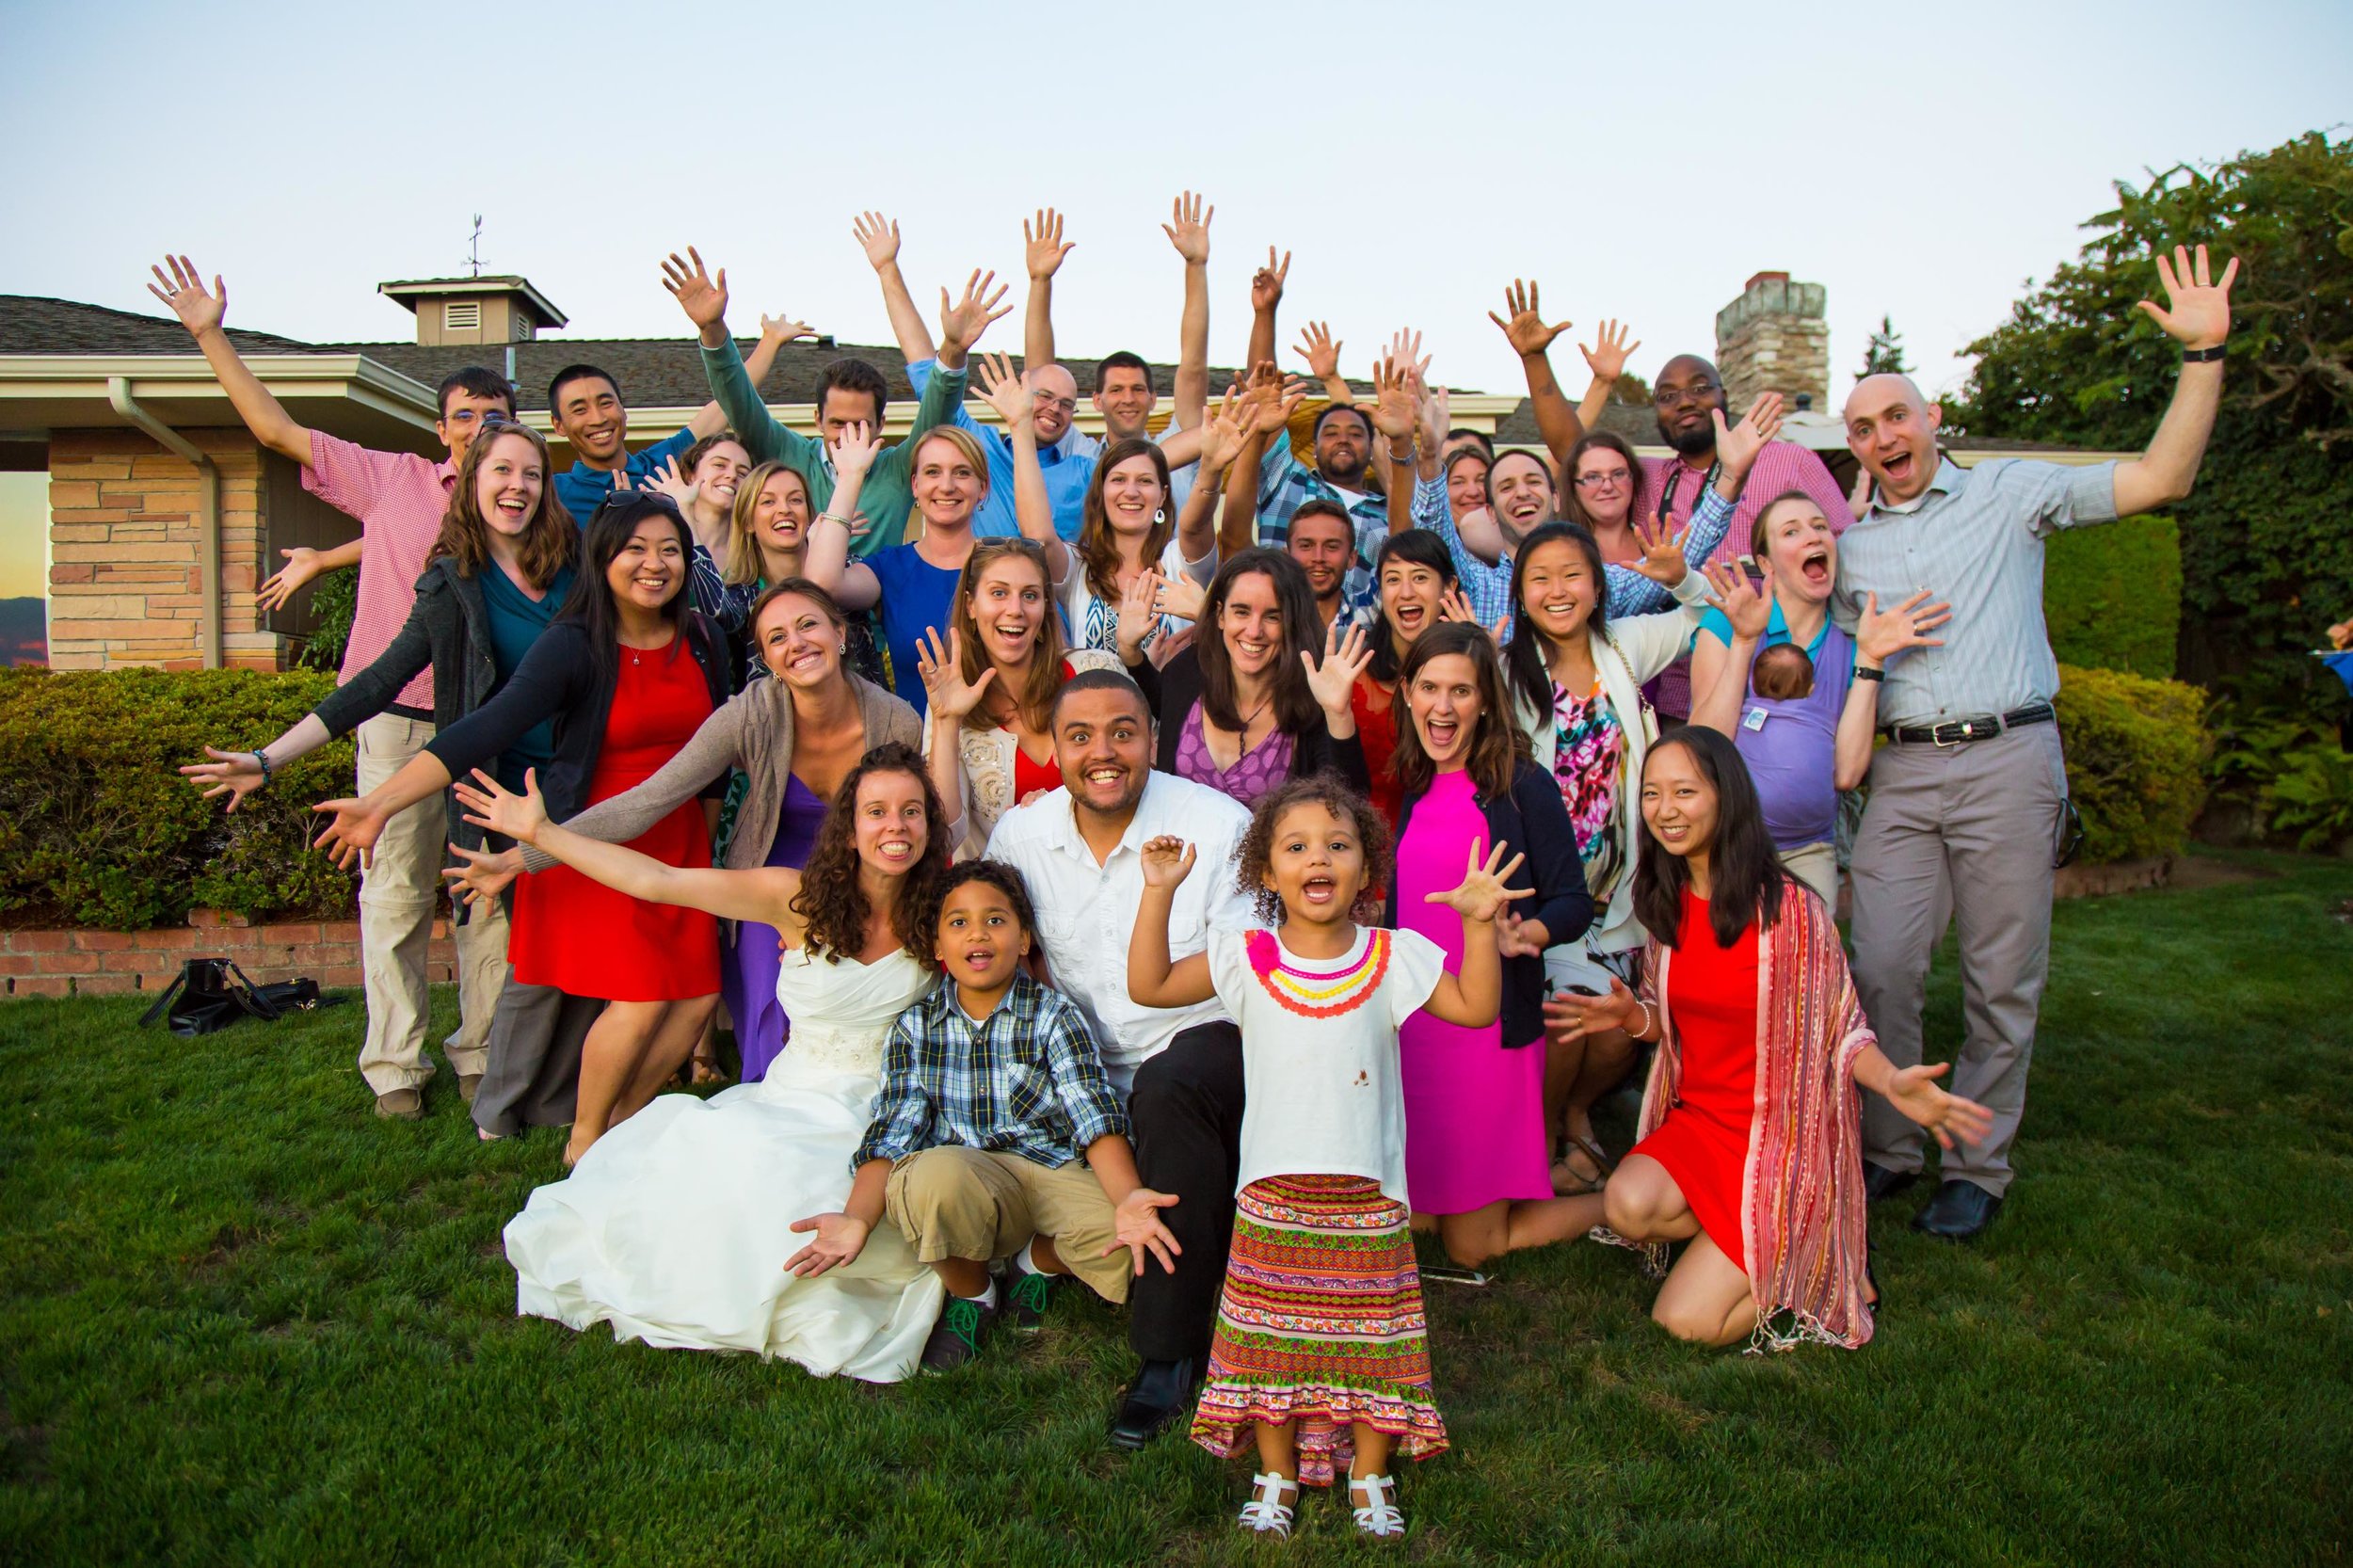 Group Photo of Family and Guests | Seattle Wedding Photographer | By G. Lin Photography